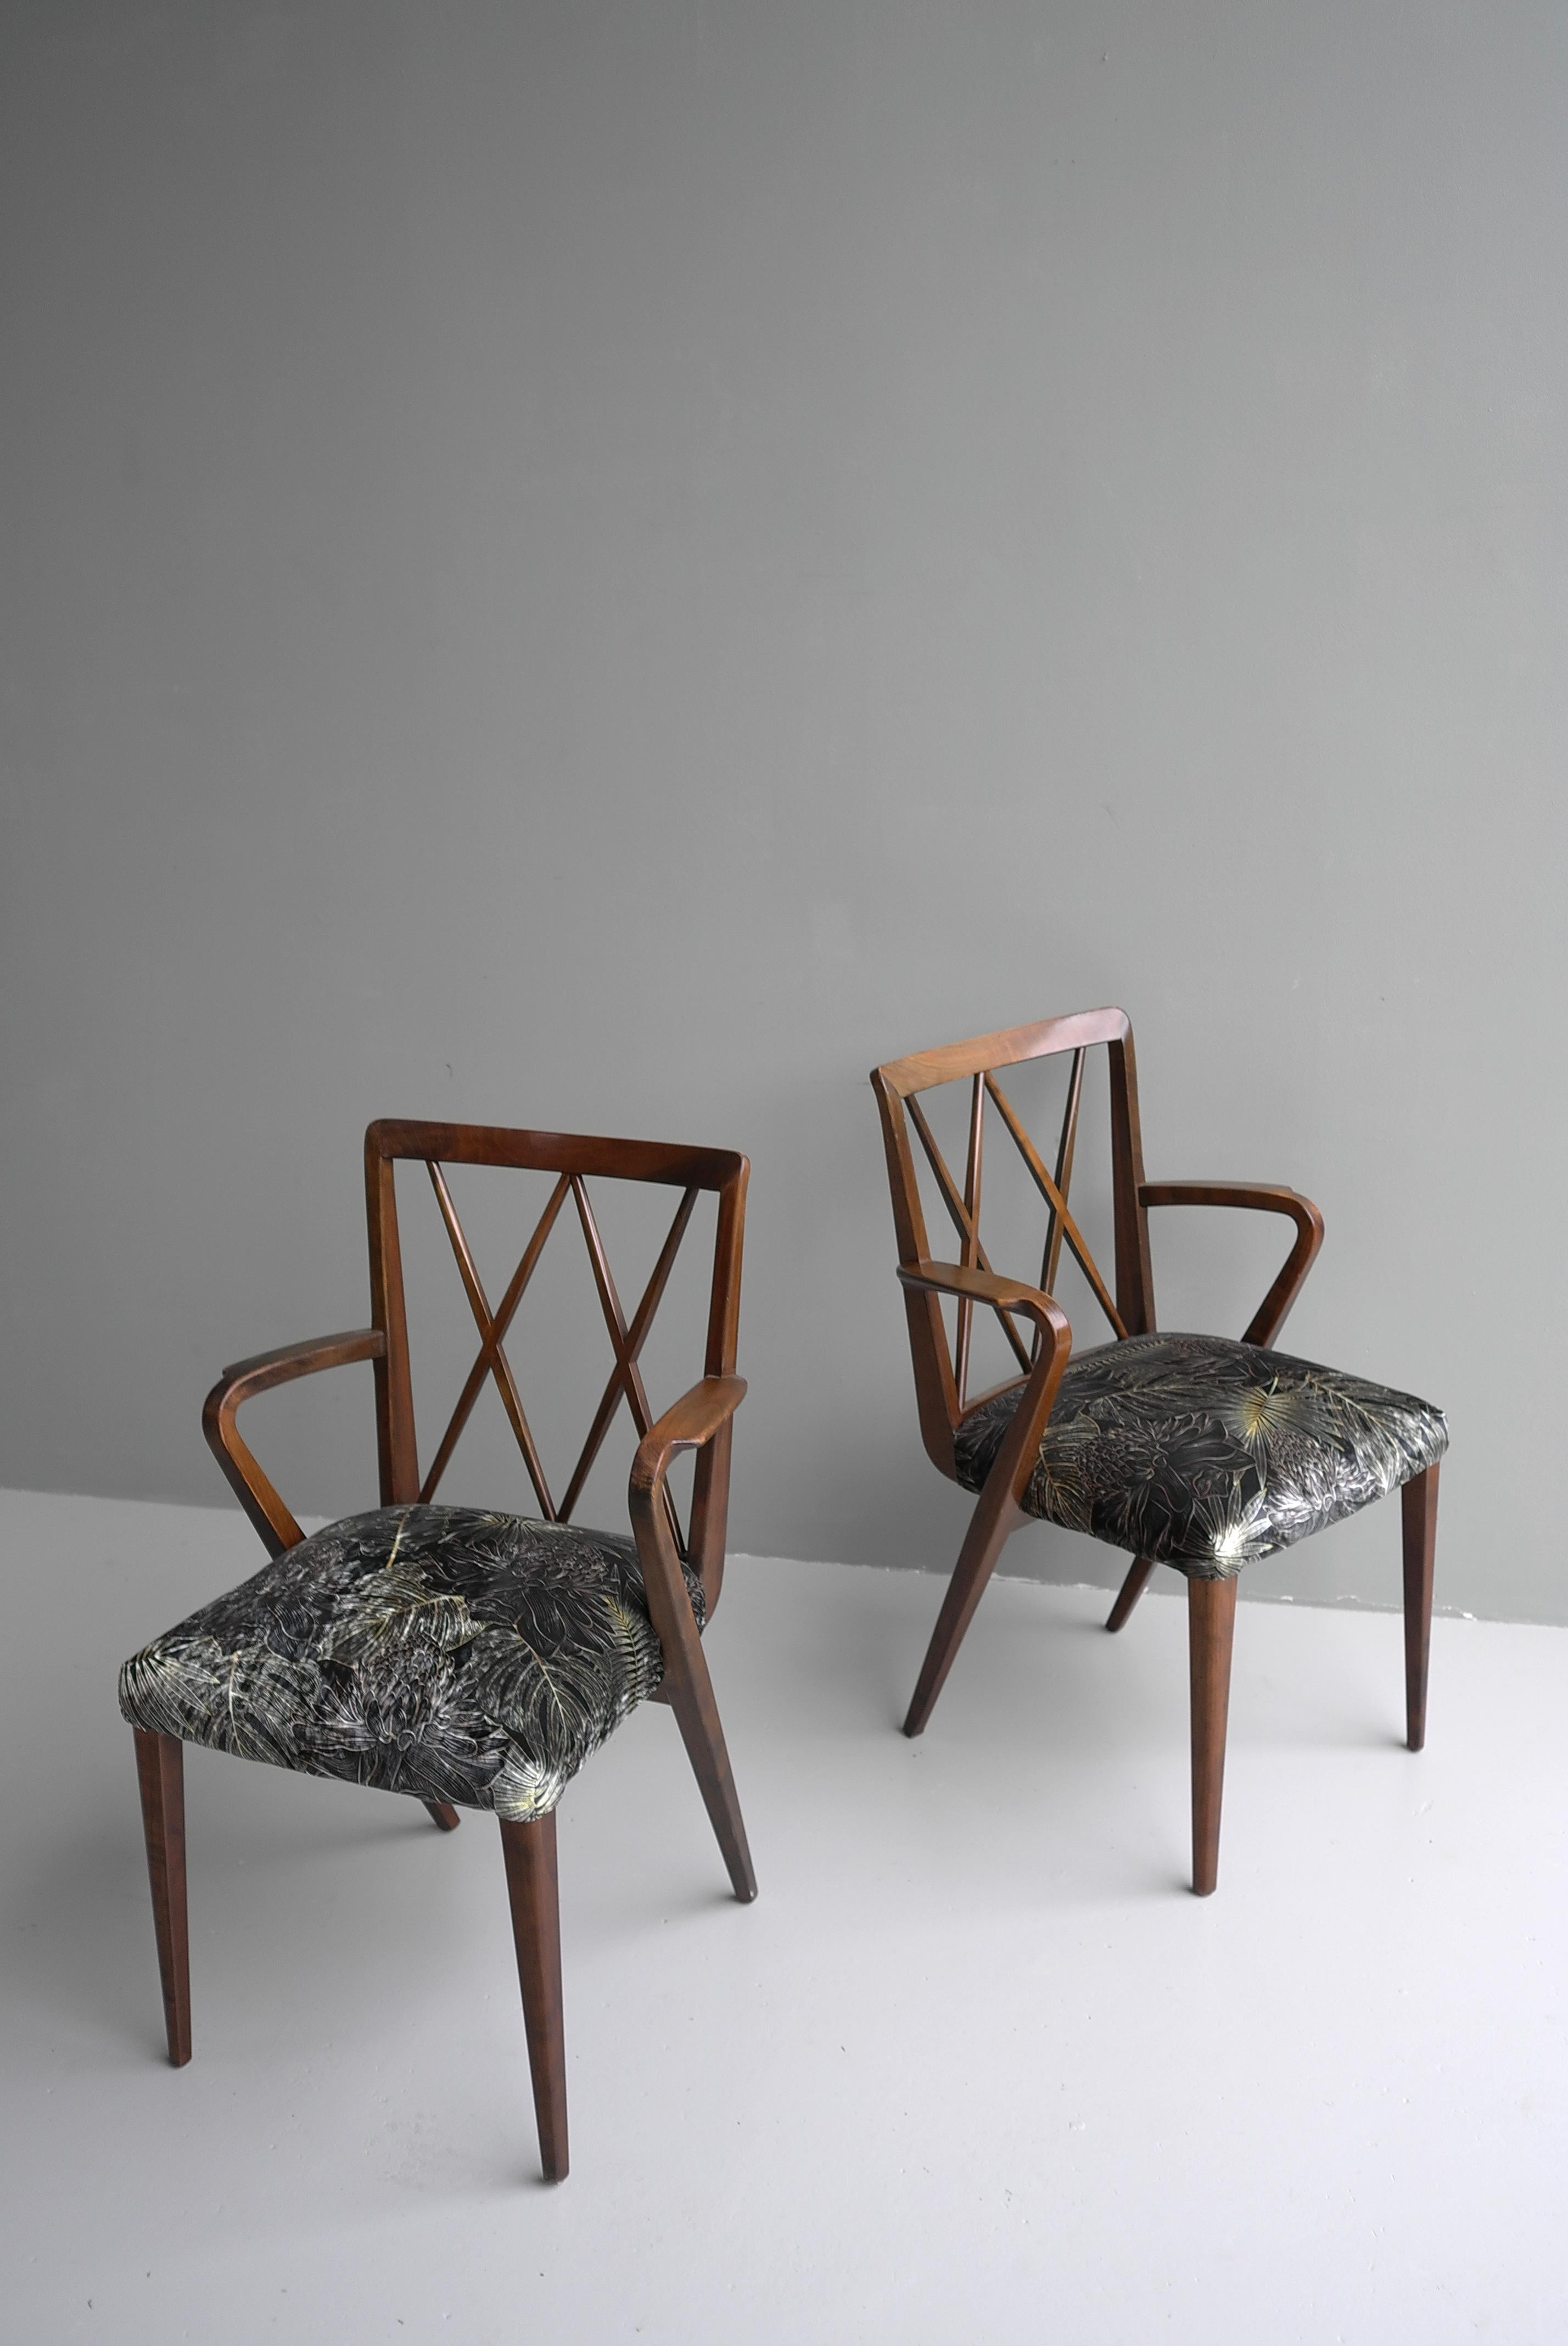 20th Century Abraham A Patijn Poly-Z Tropical side Chairs in Walnut, The Netherlands, 1950s For Sale